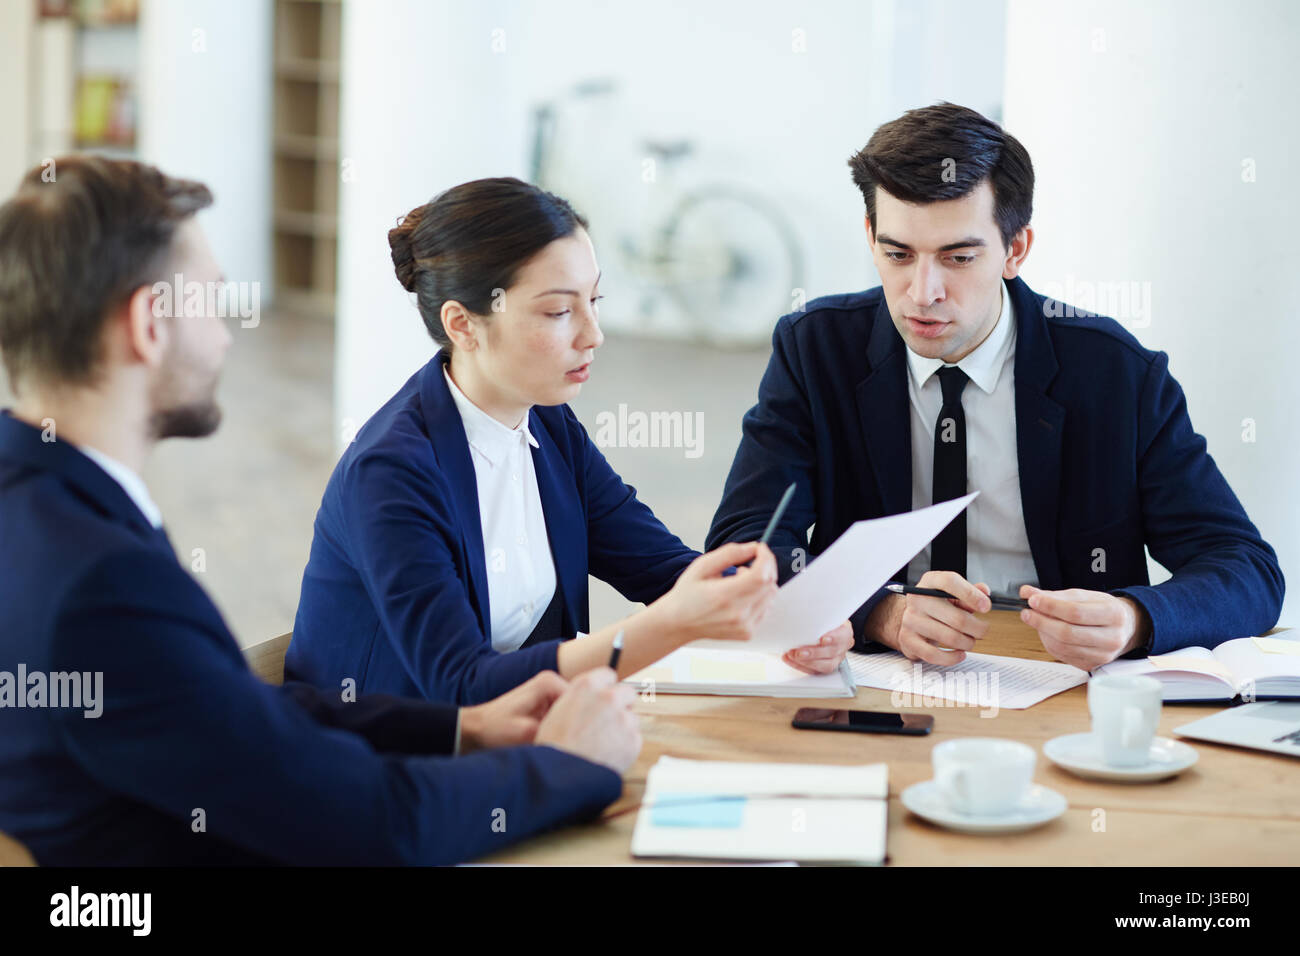 Discussing document Stock Photo